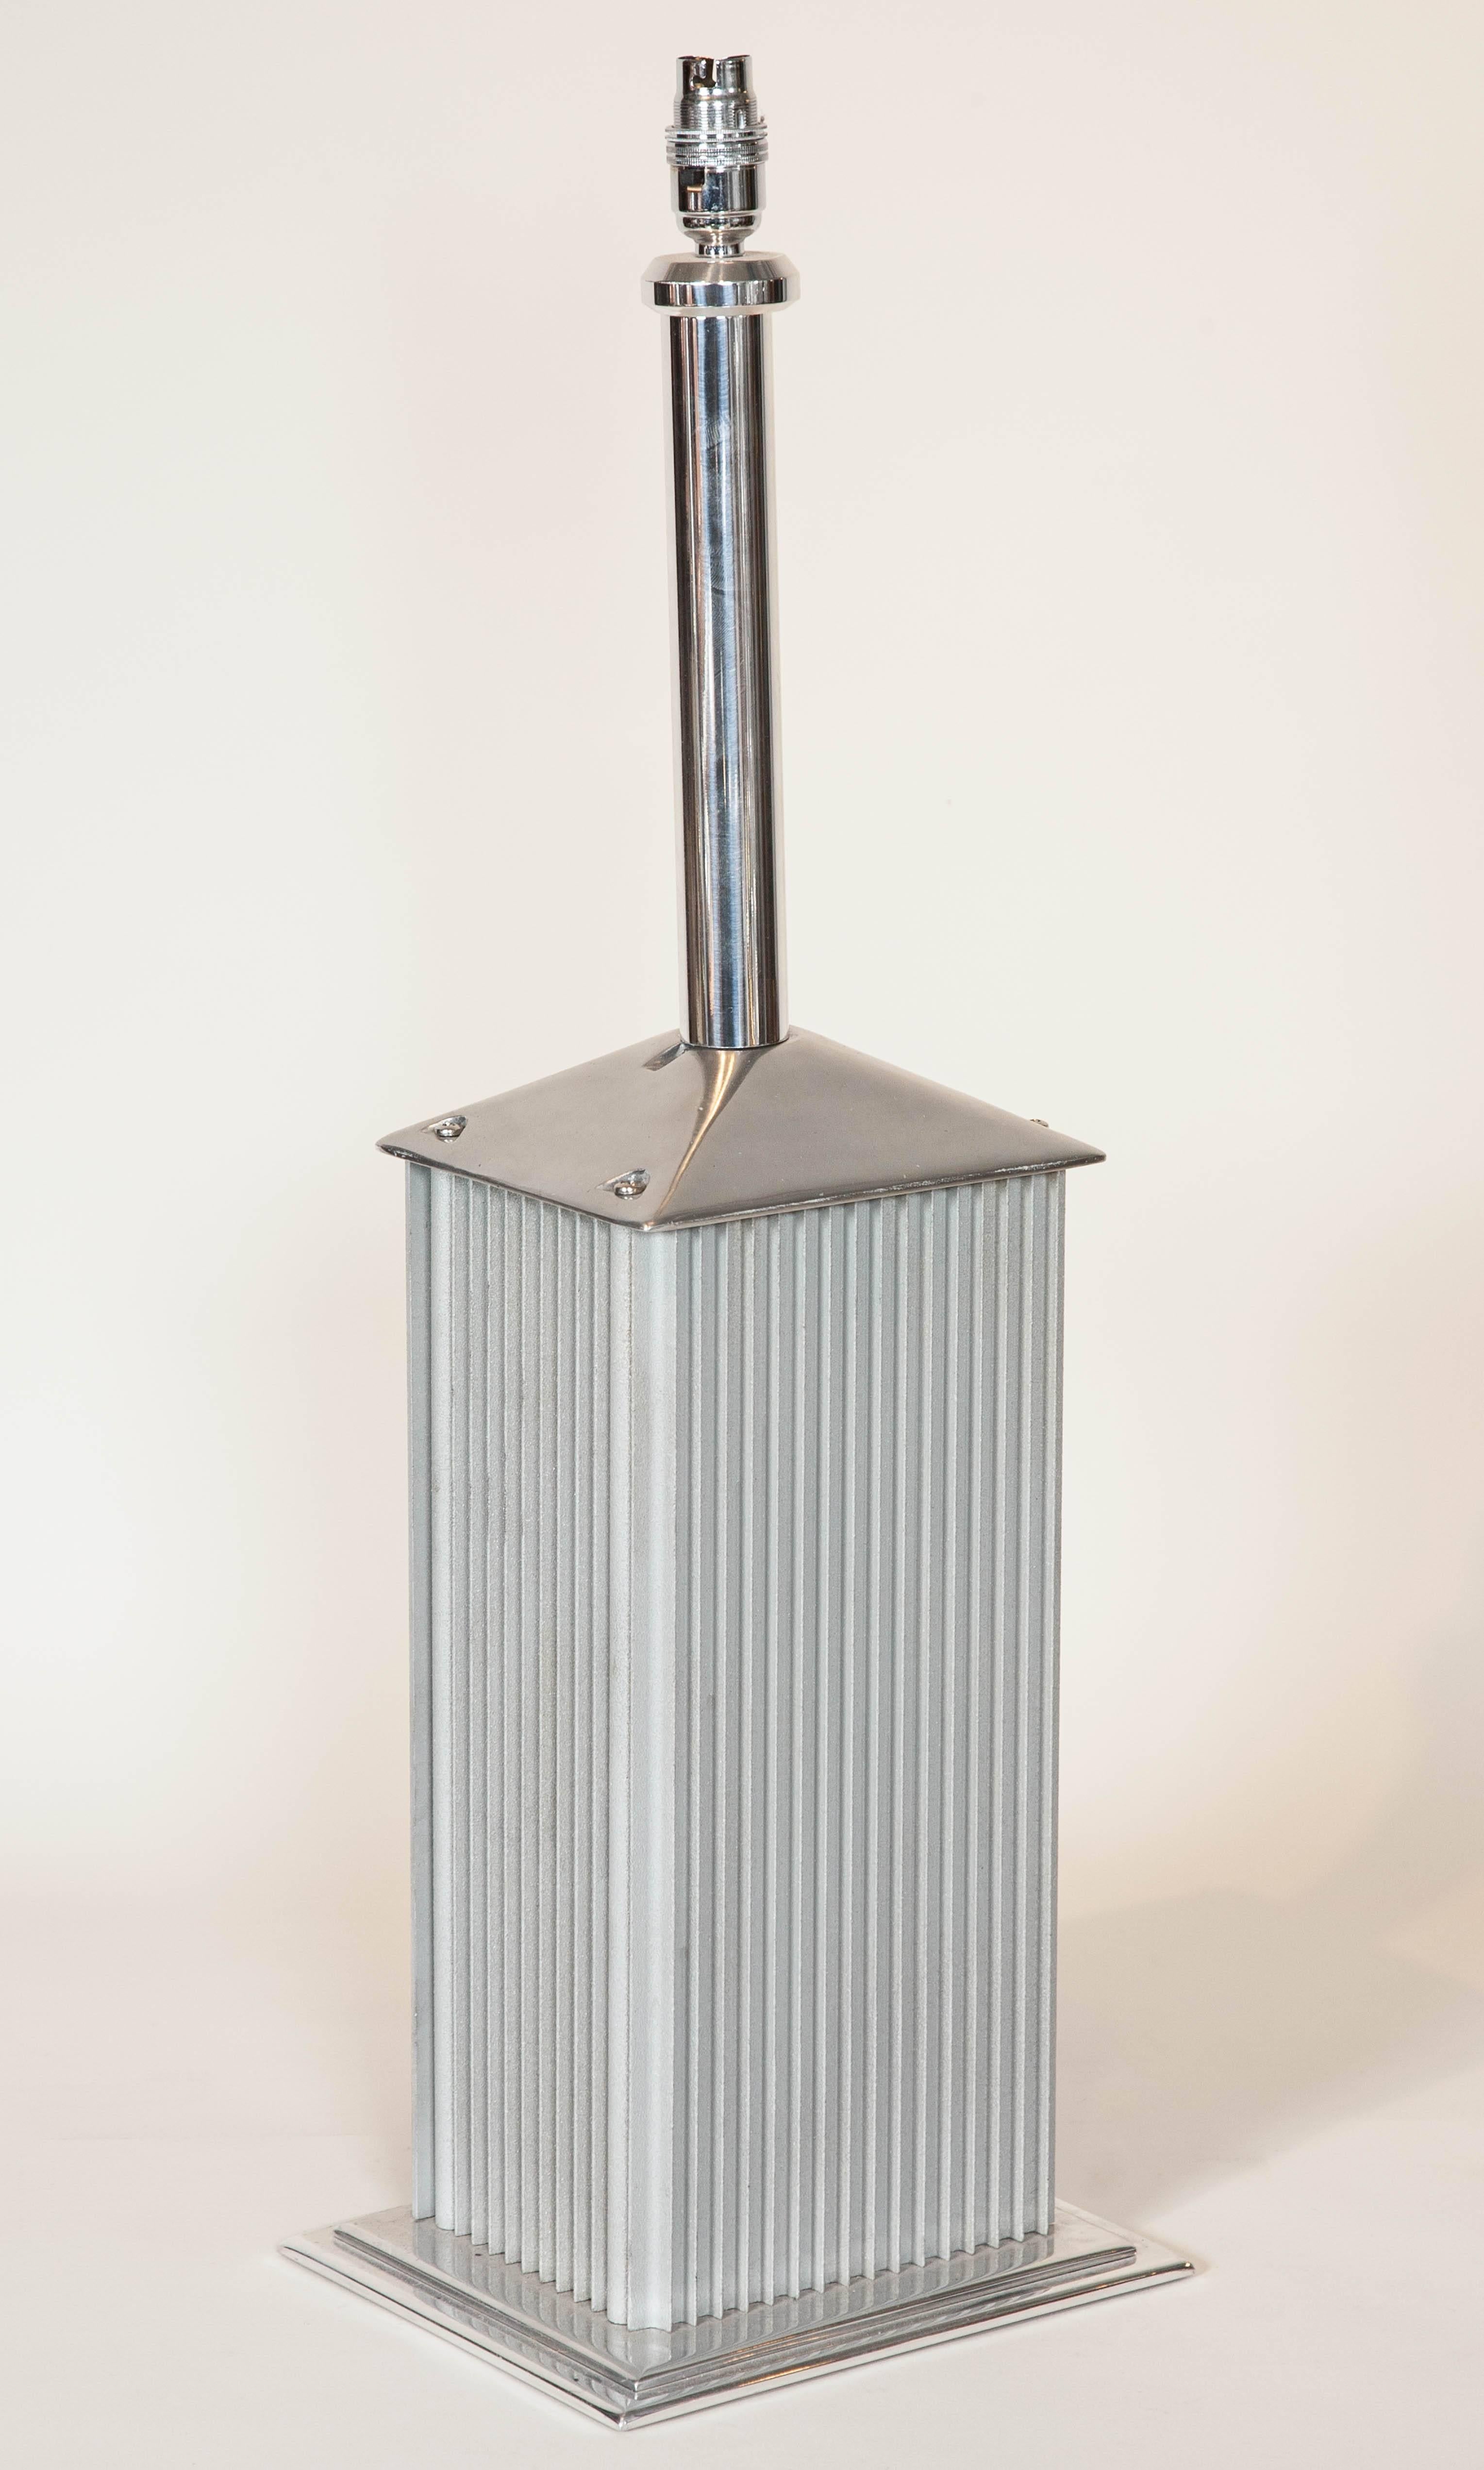 A group of 6 table lamps constructed from Industrial transformer cases.

3 of each size.

Measures: Height of small size: 25 inches - 64 cm.

Height of large size: 28 1/4 inches - 72 cm.